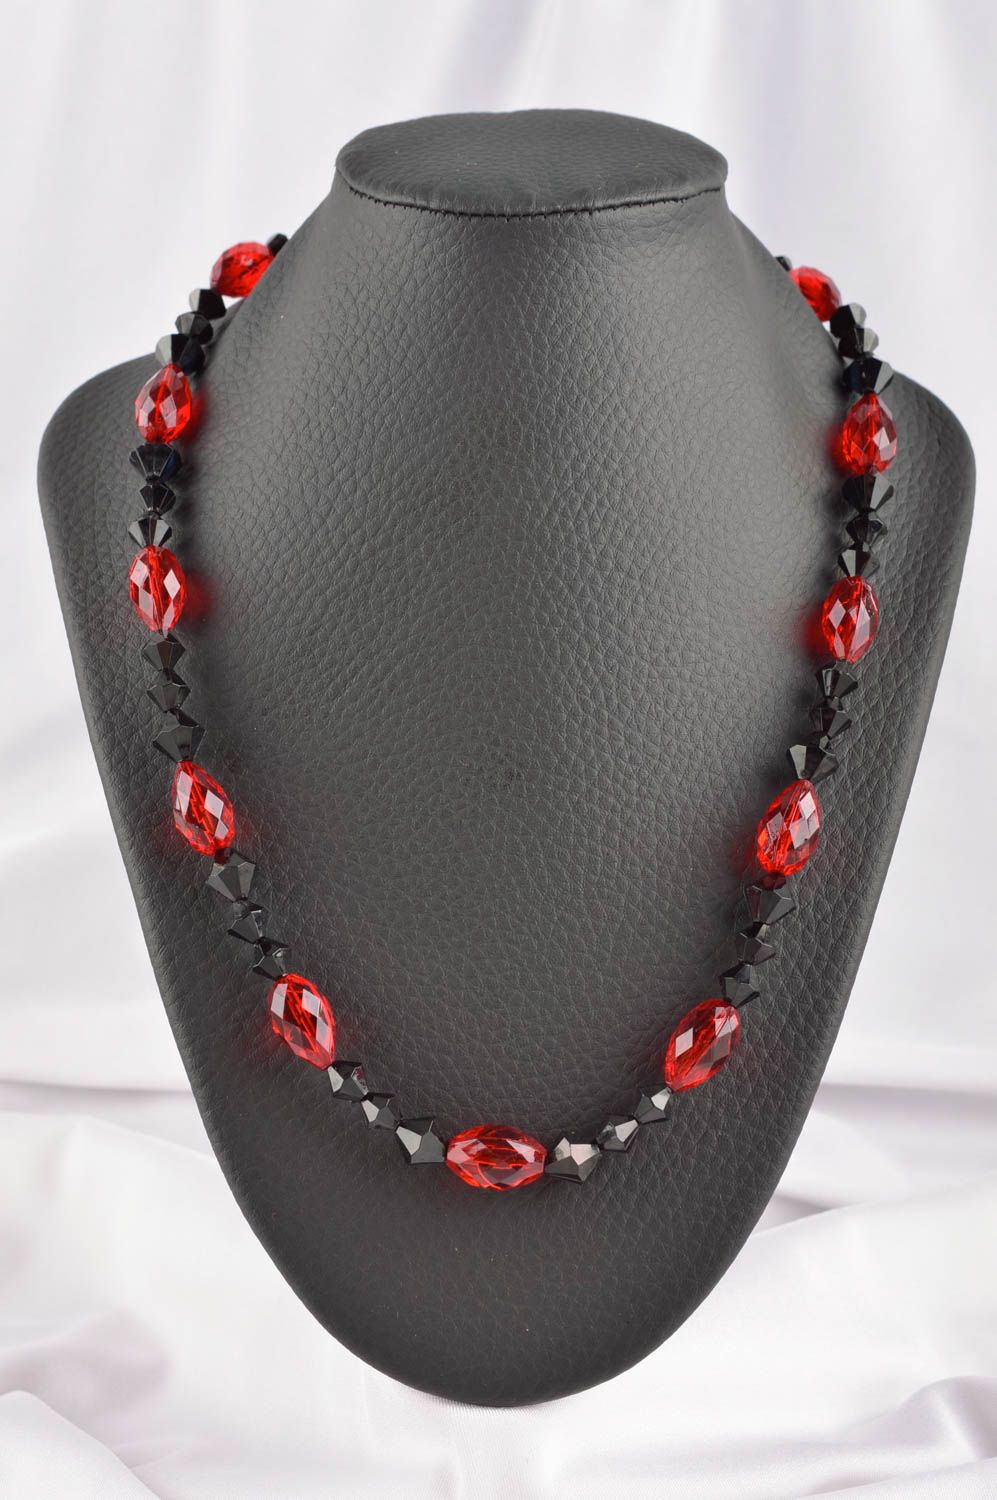 Bead necklace handmade jewelry beaded necklace best gifts for women cool jewelry photo 1